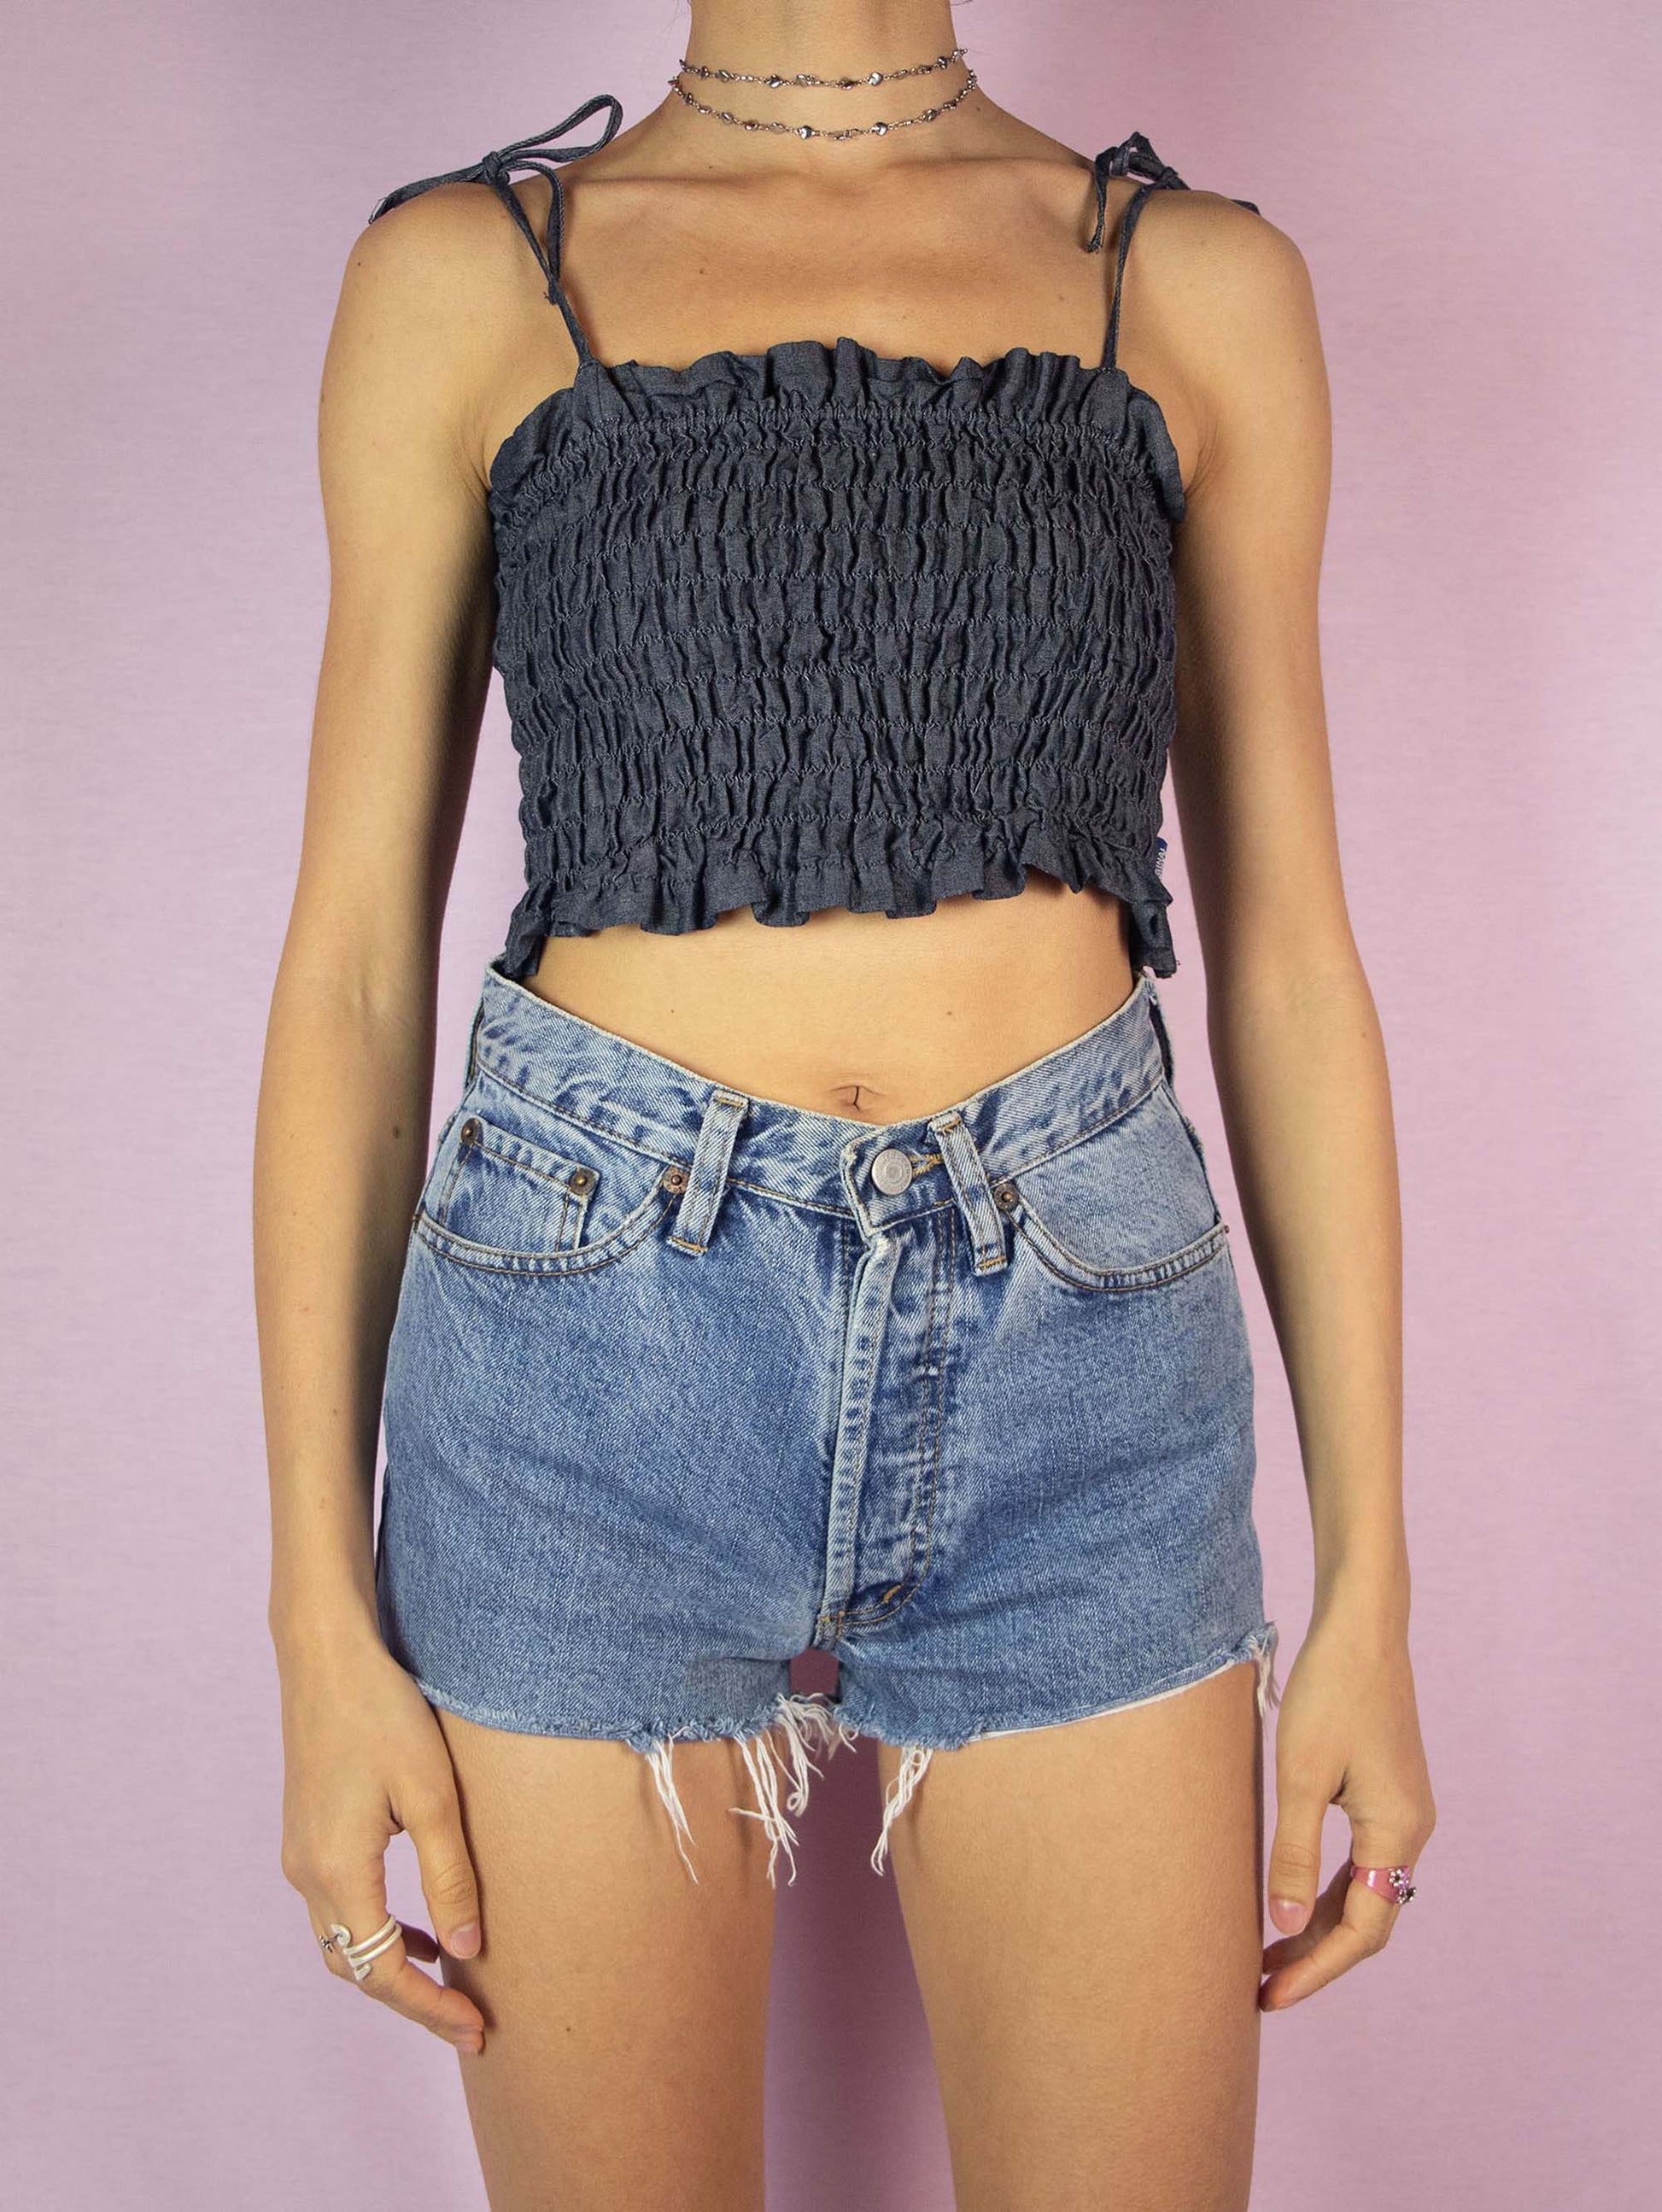 The Y2K Denim Shirred Crop Top is a vintage 2000s summer beach blue ruched top with tie straps.